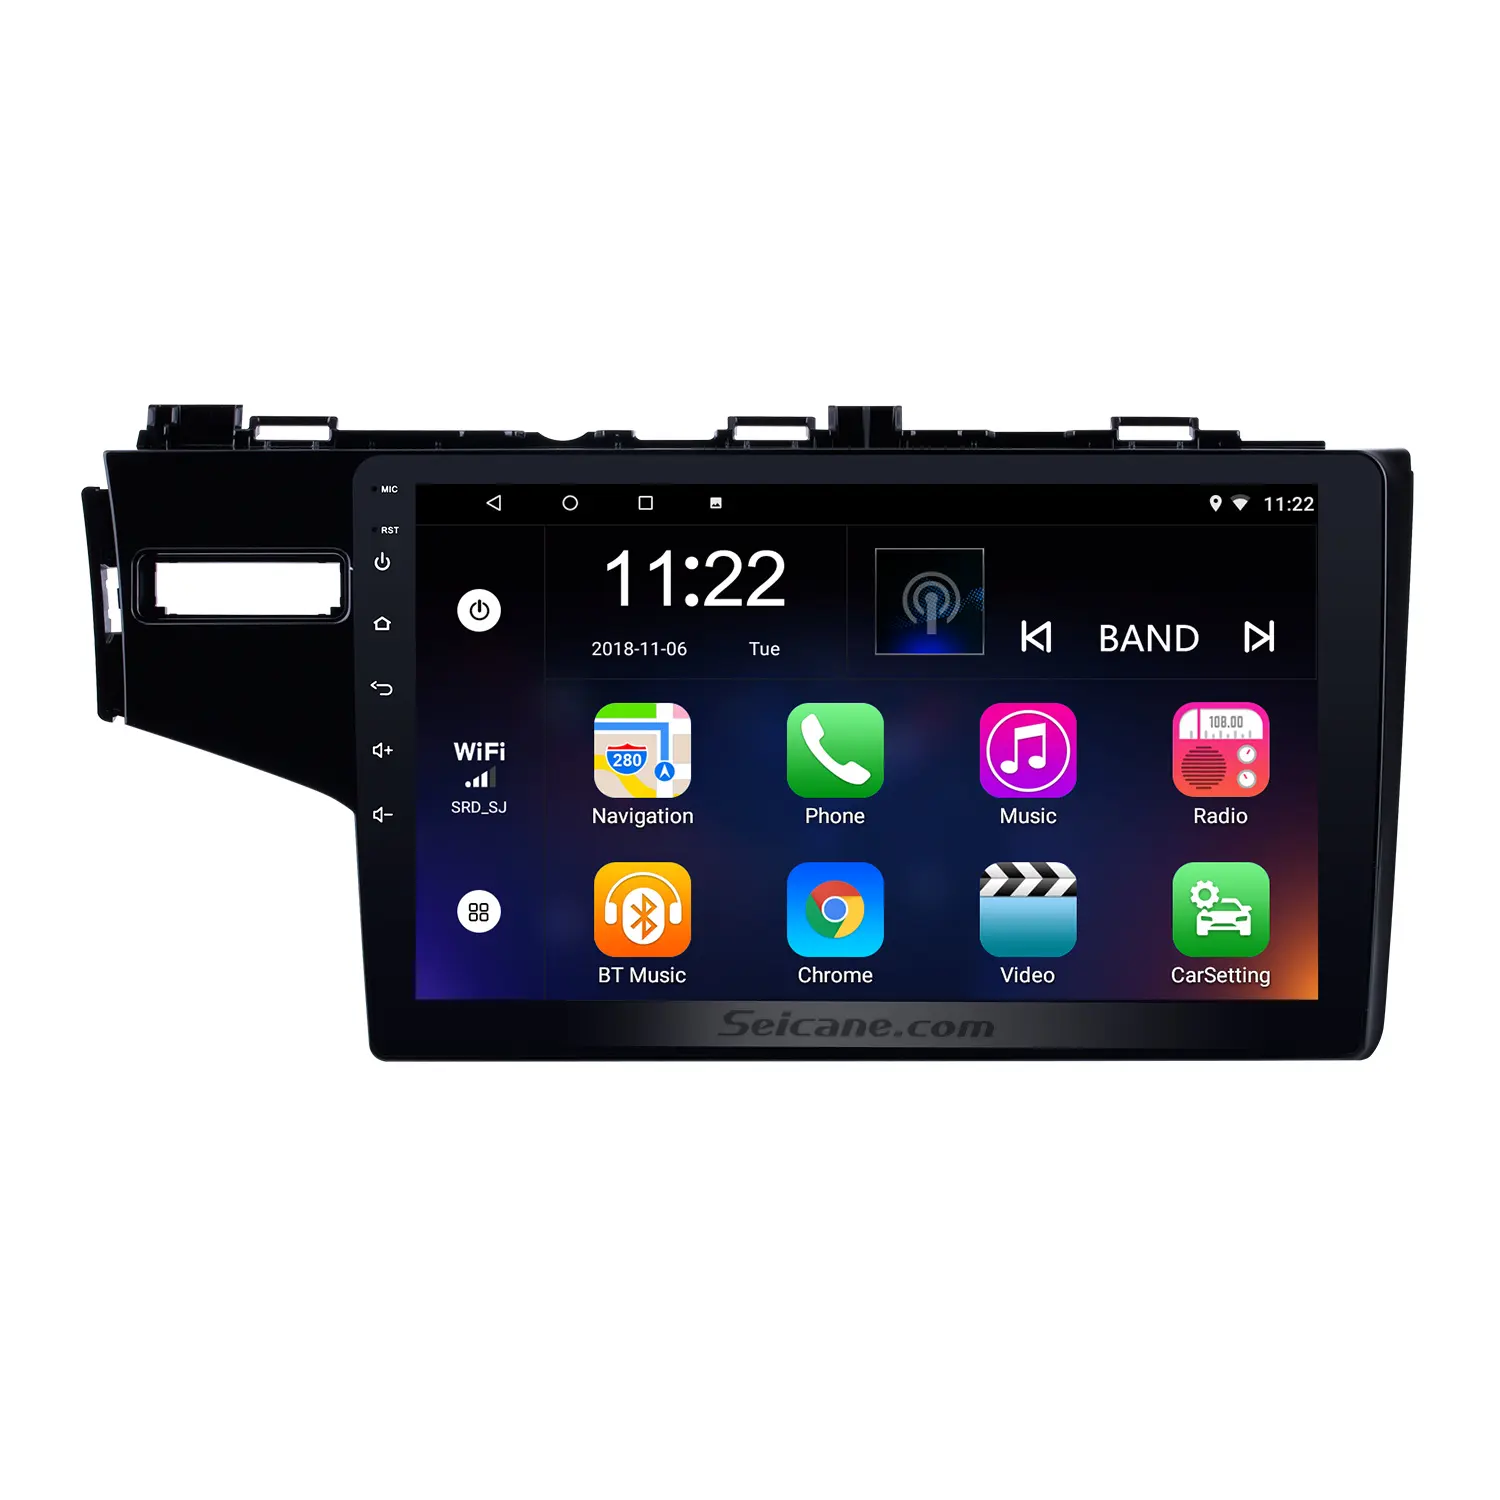 9 inch auto radio Android 13.0 1 din car stereo system for 2014-2017 HONDA FIT/JAZZ dab car radio with carplay wifi